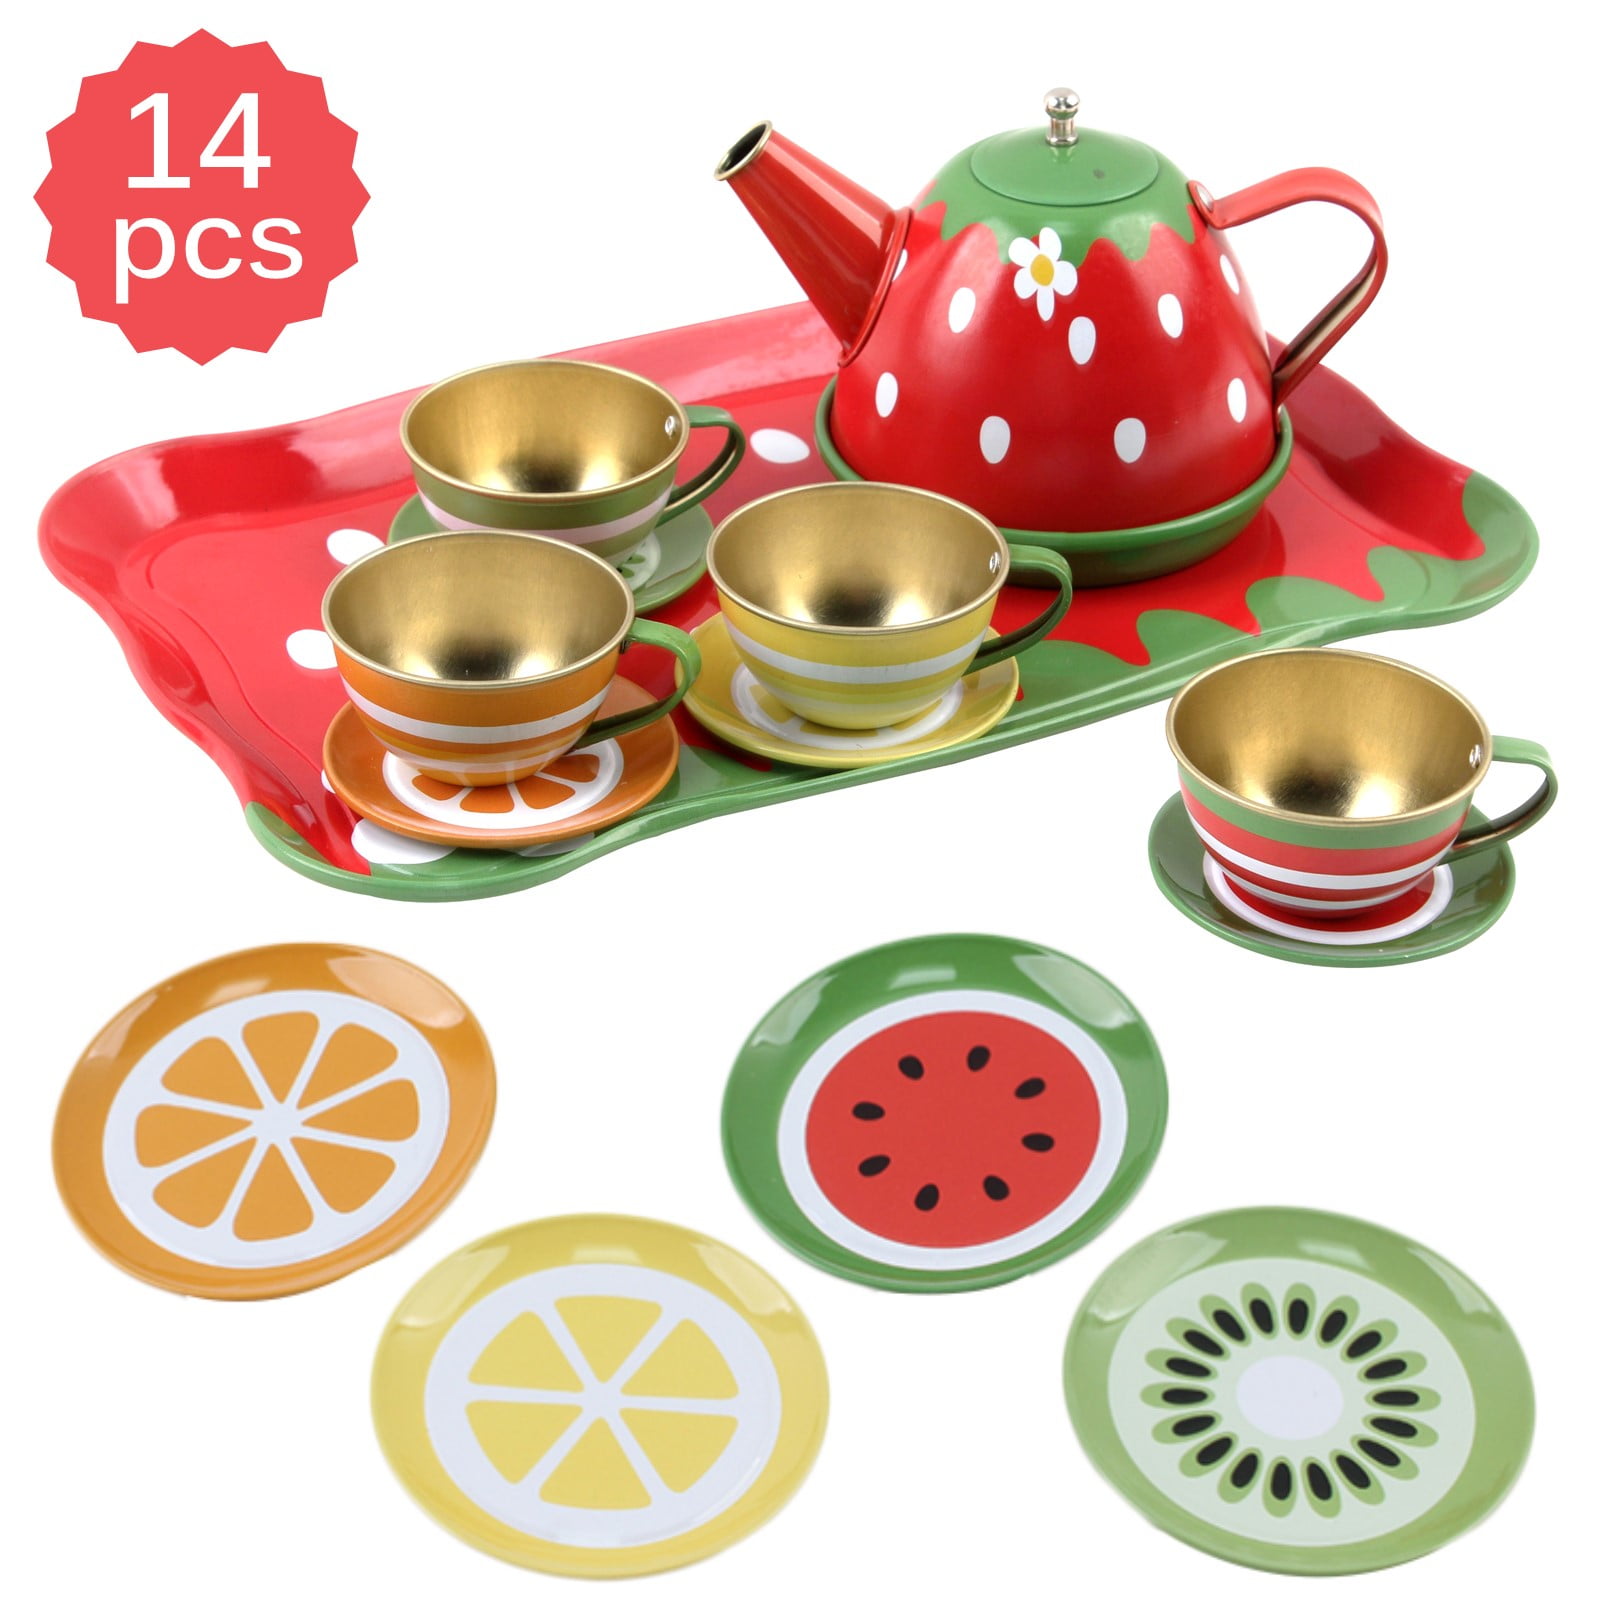 20 PCS Pretend Play Tableware kitchen and tea play set pouding 